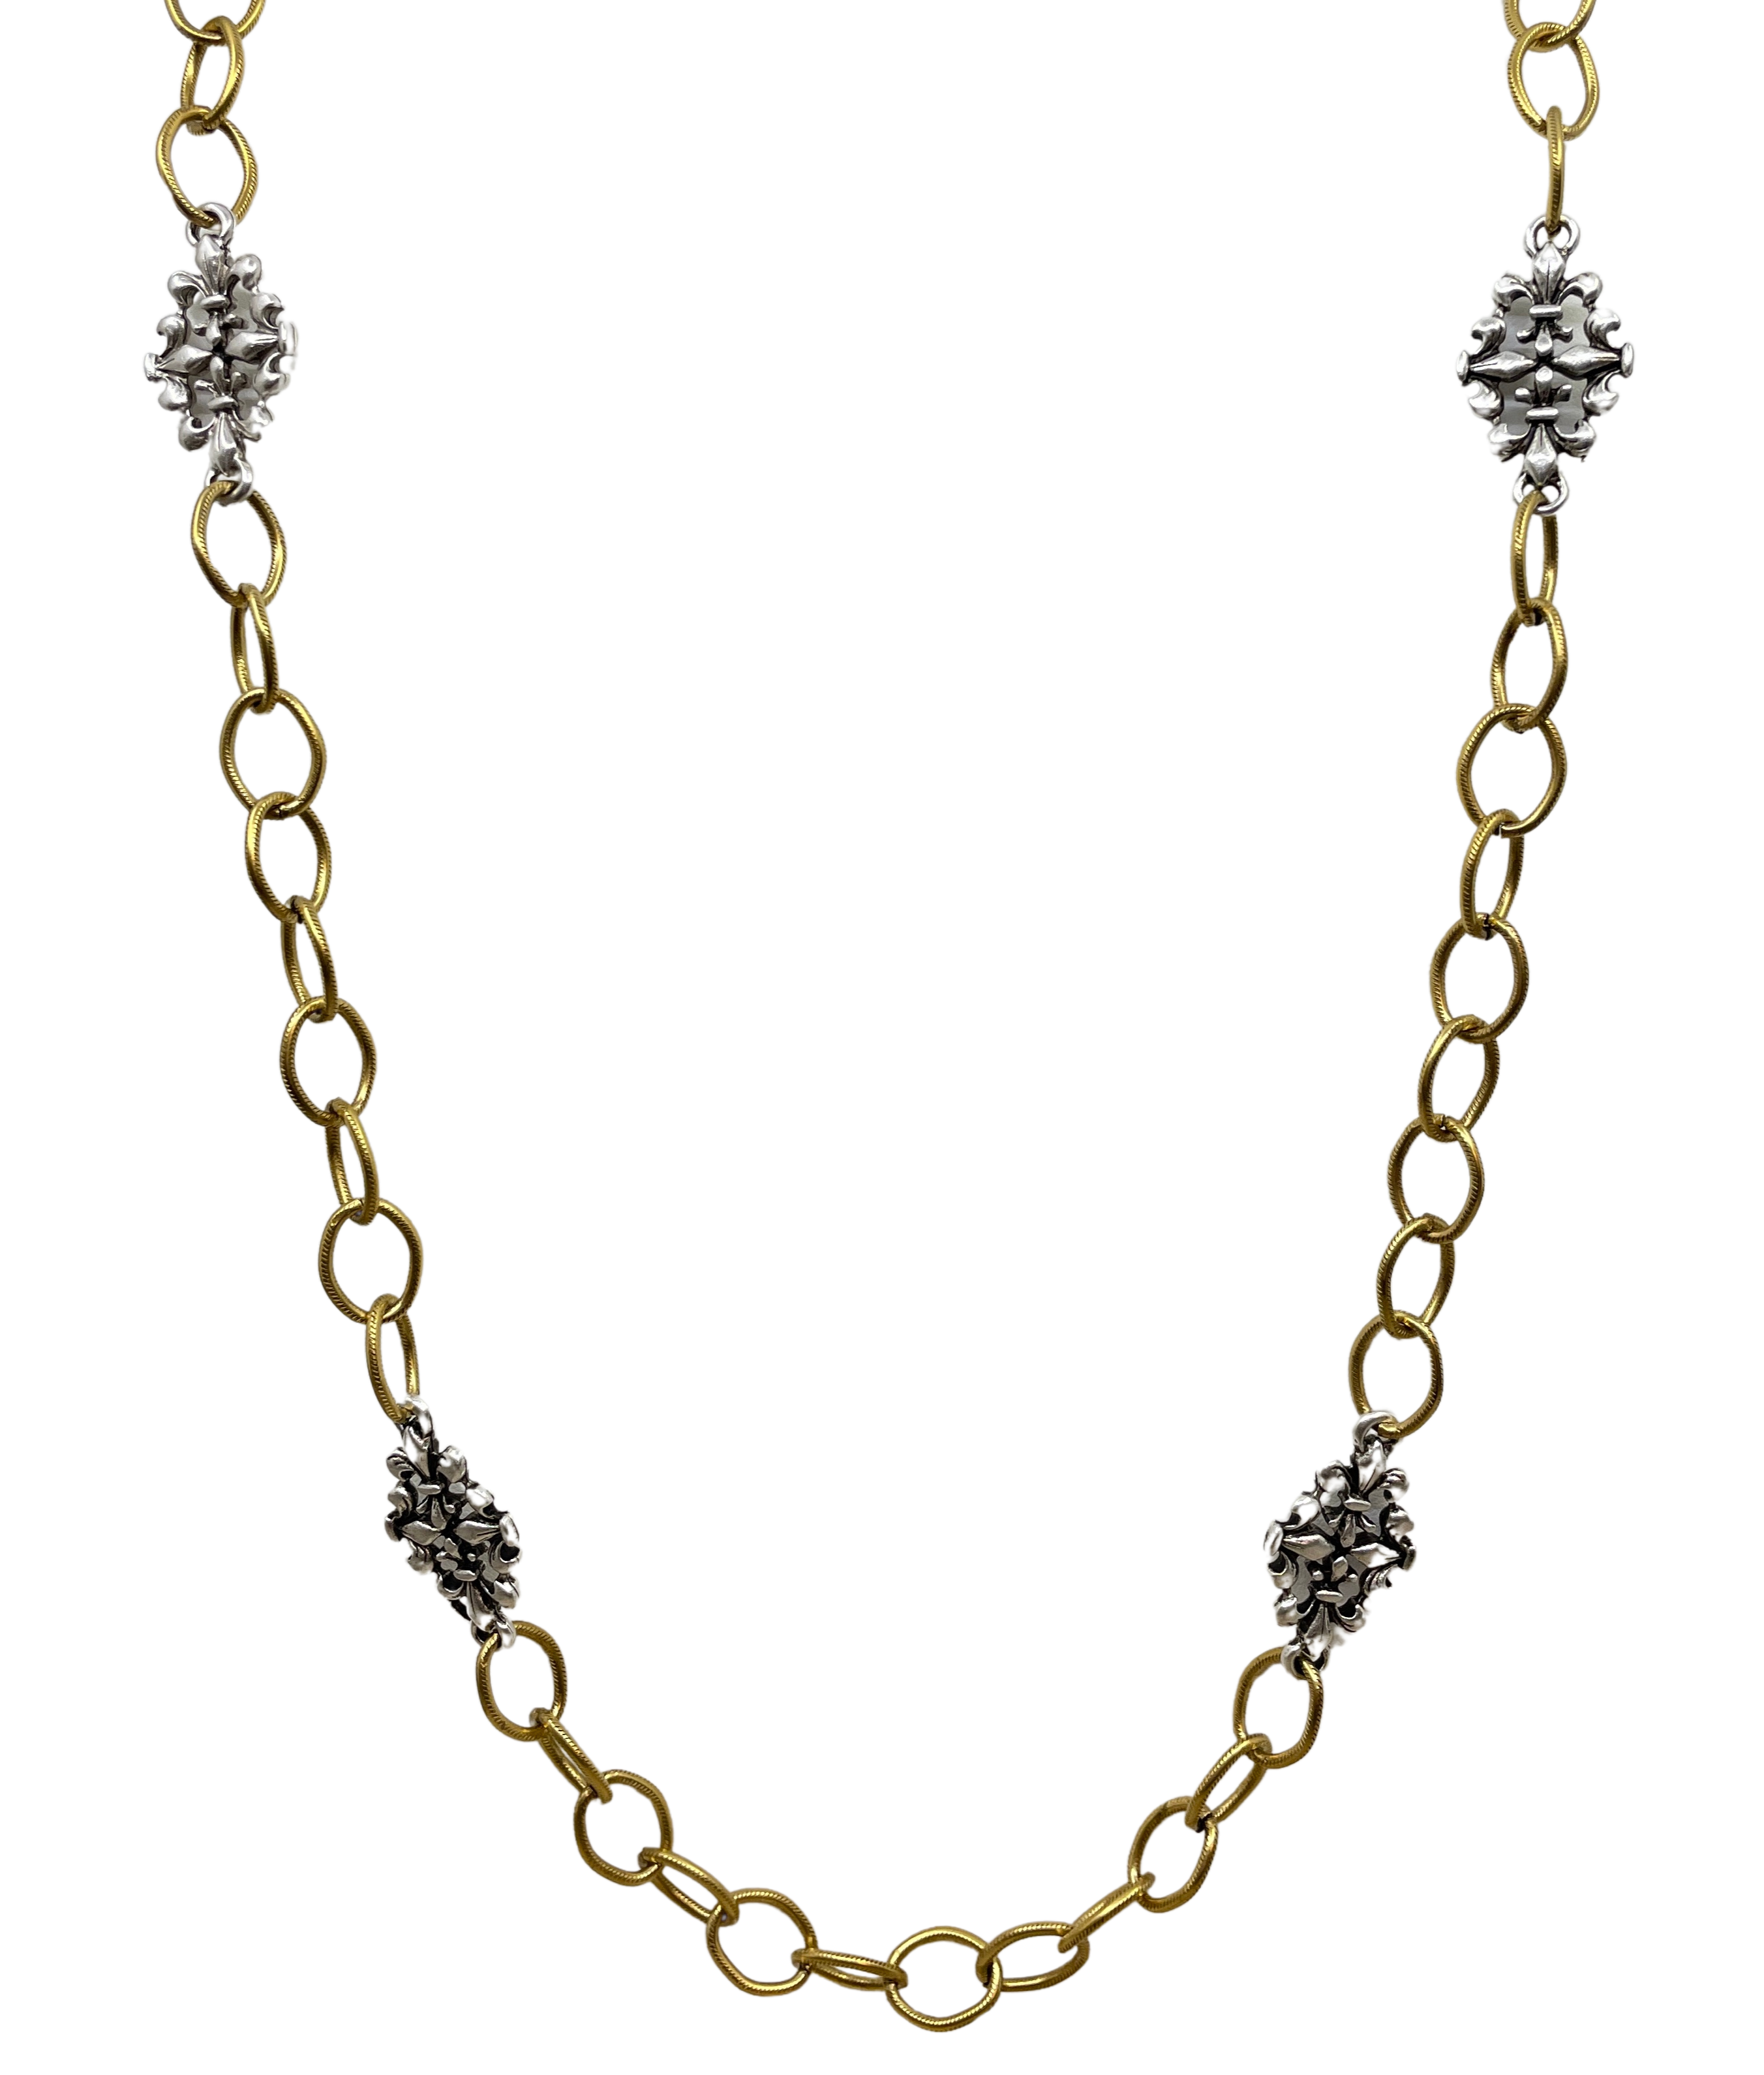 Mixed Metal Sterling & Gold Plated 36" Chain with Vintage Reproduction Fleur De Lis Accents